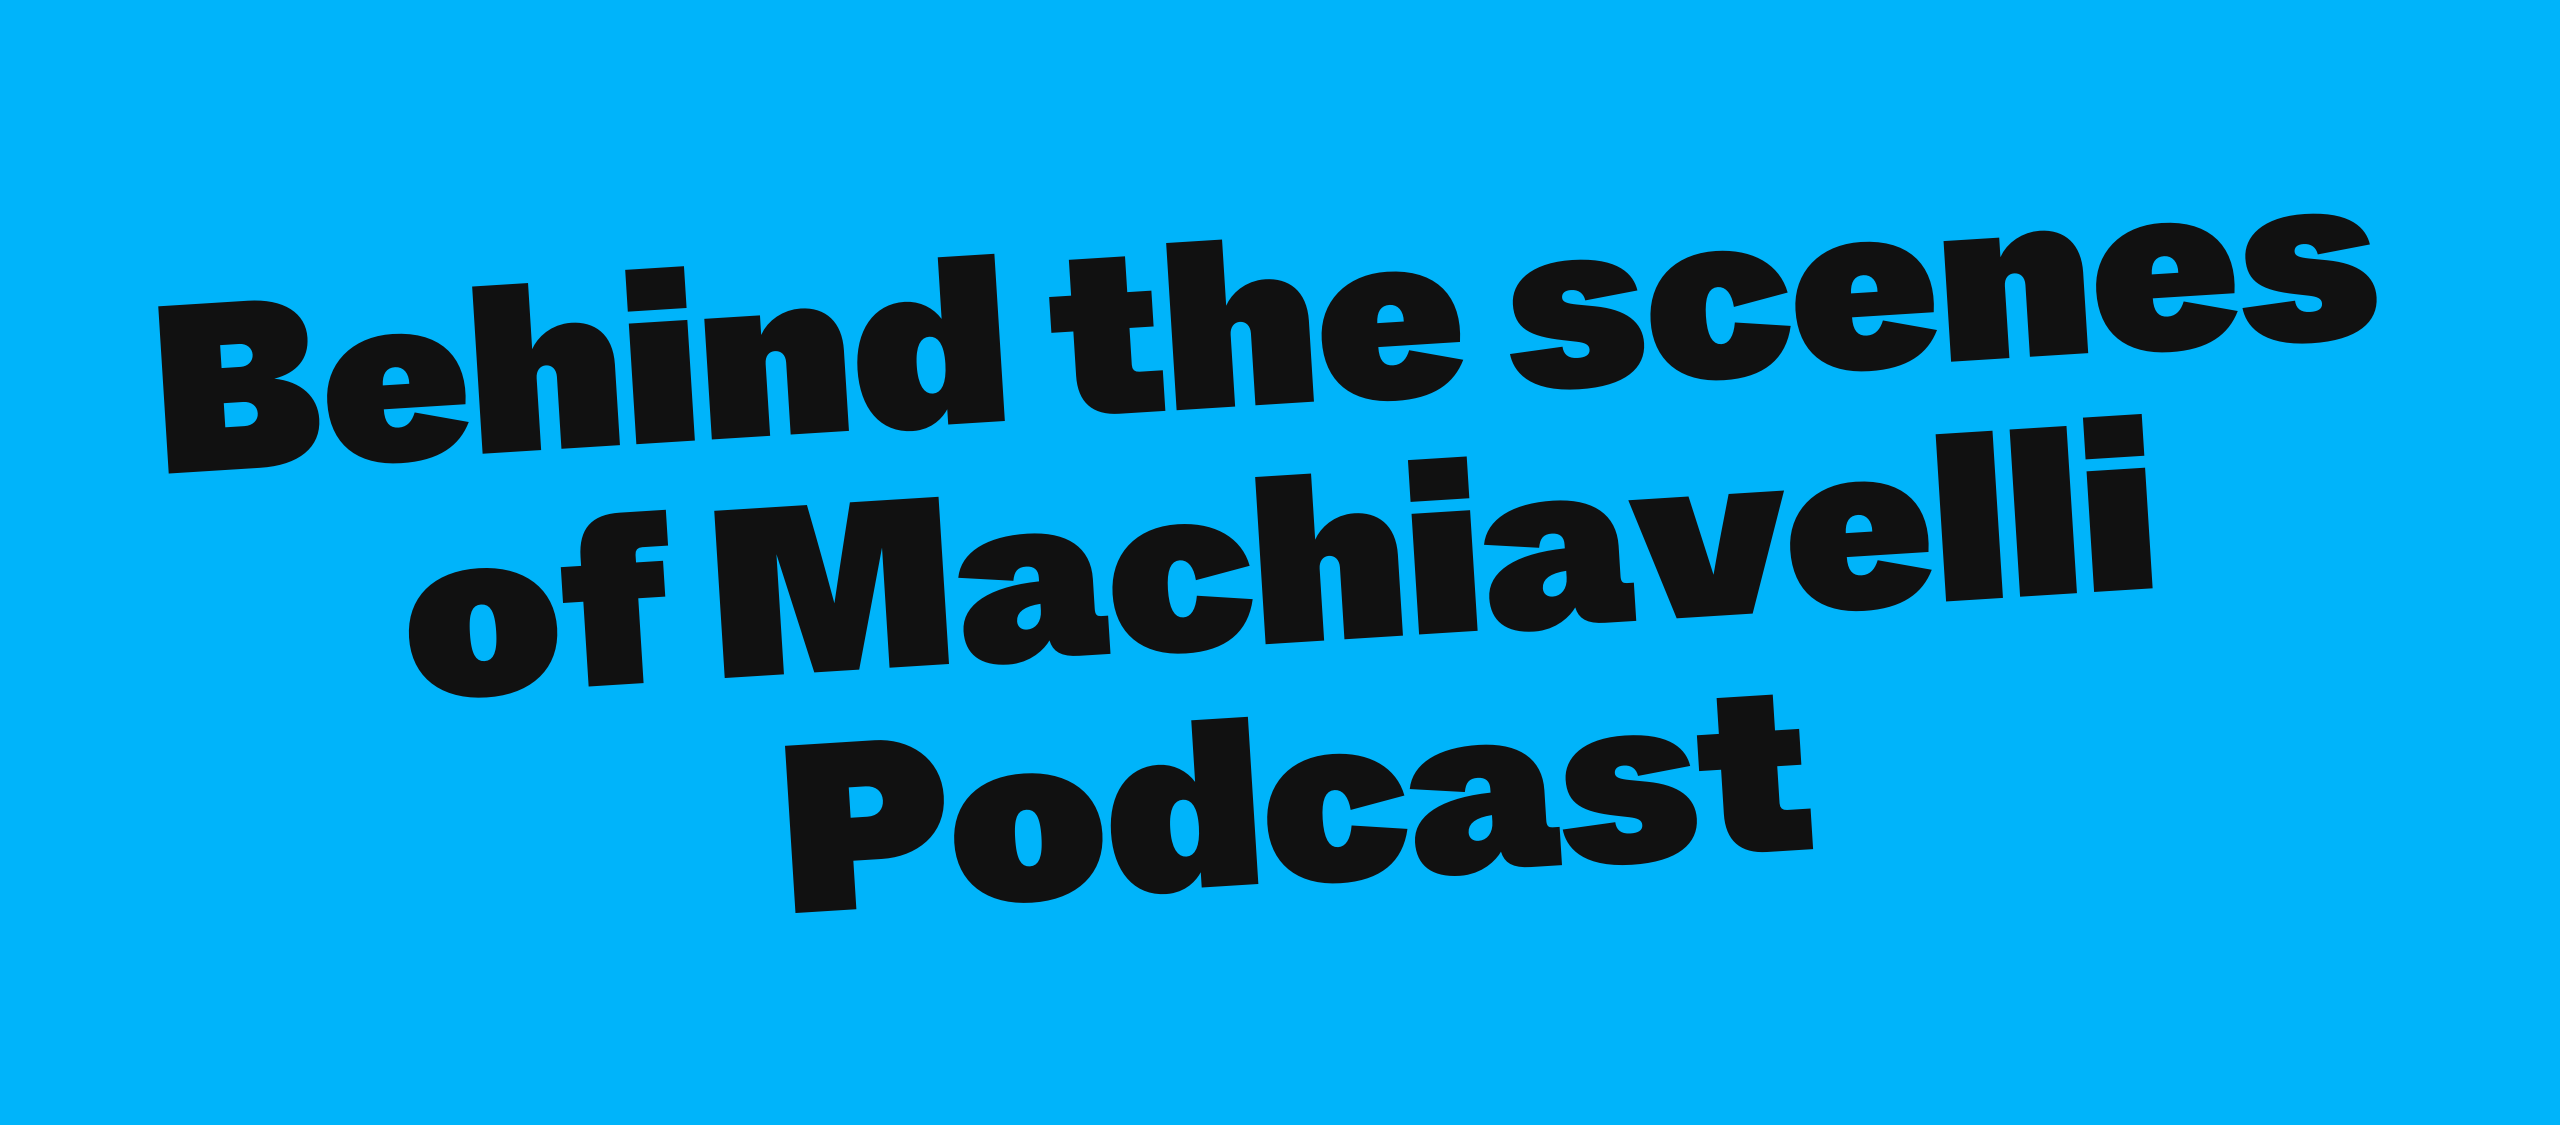 Behind the scenes of Machiavelli Podcast